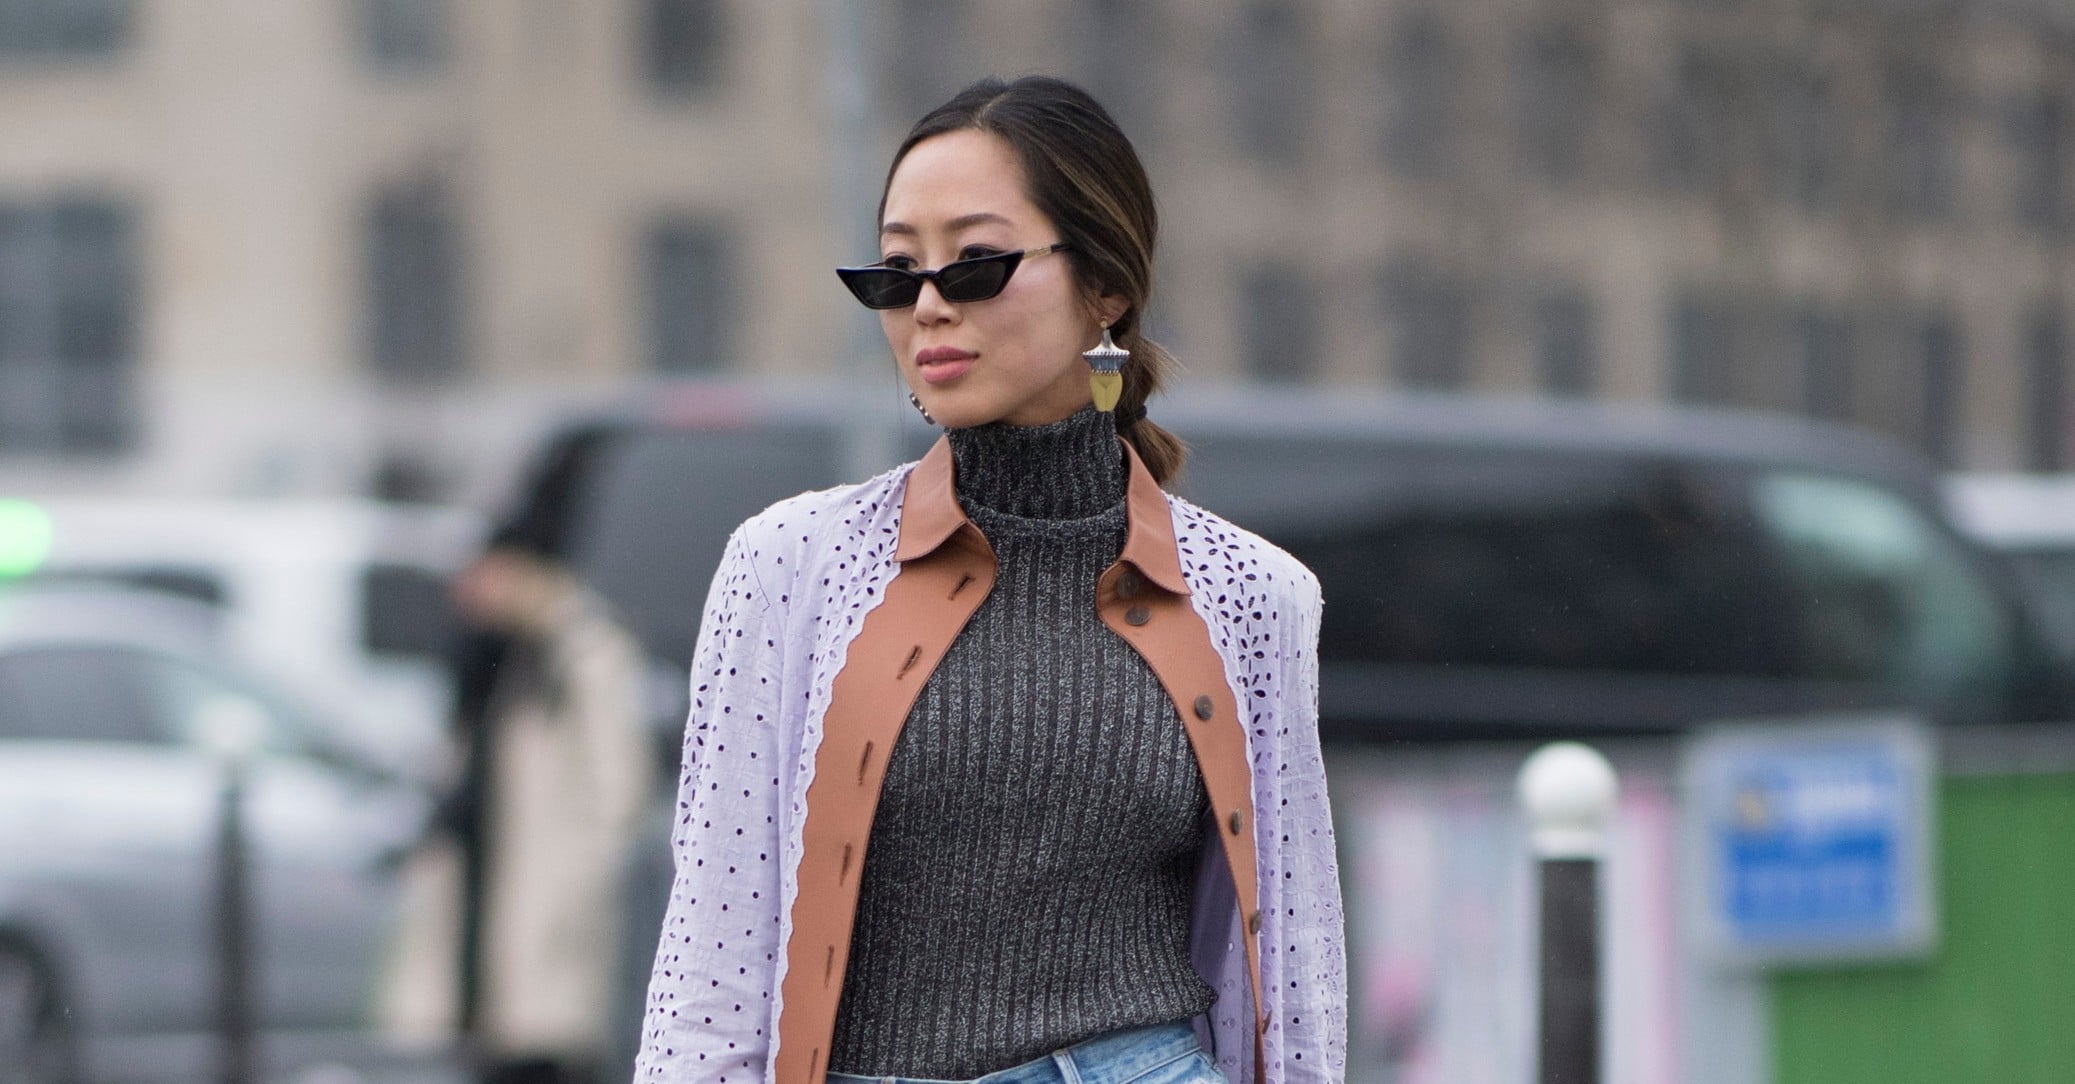 Street Style Trends For 2018 | POPSUGAR Fashion